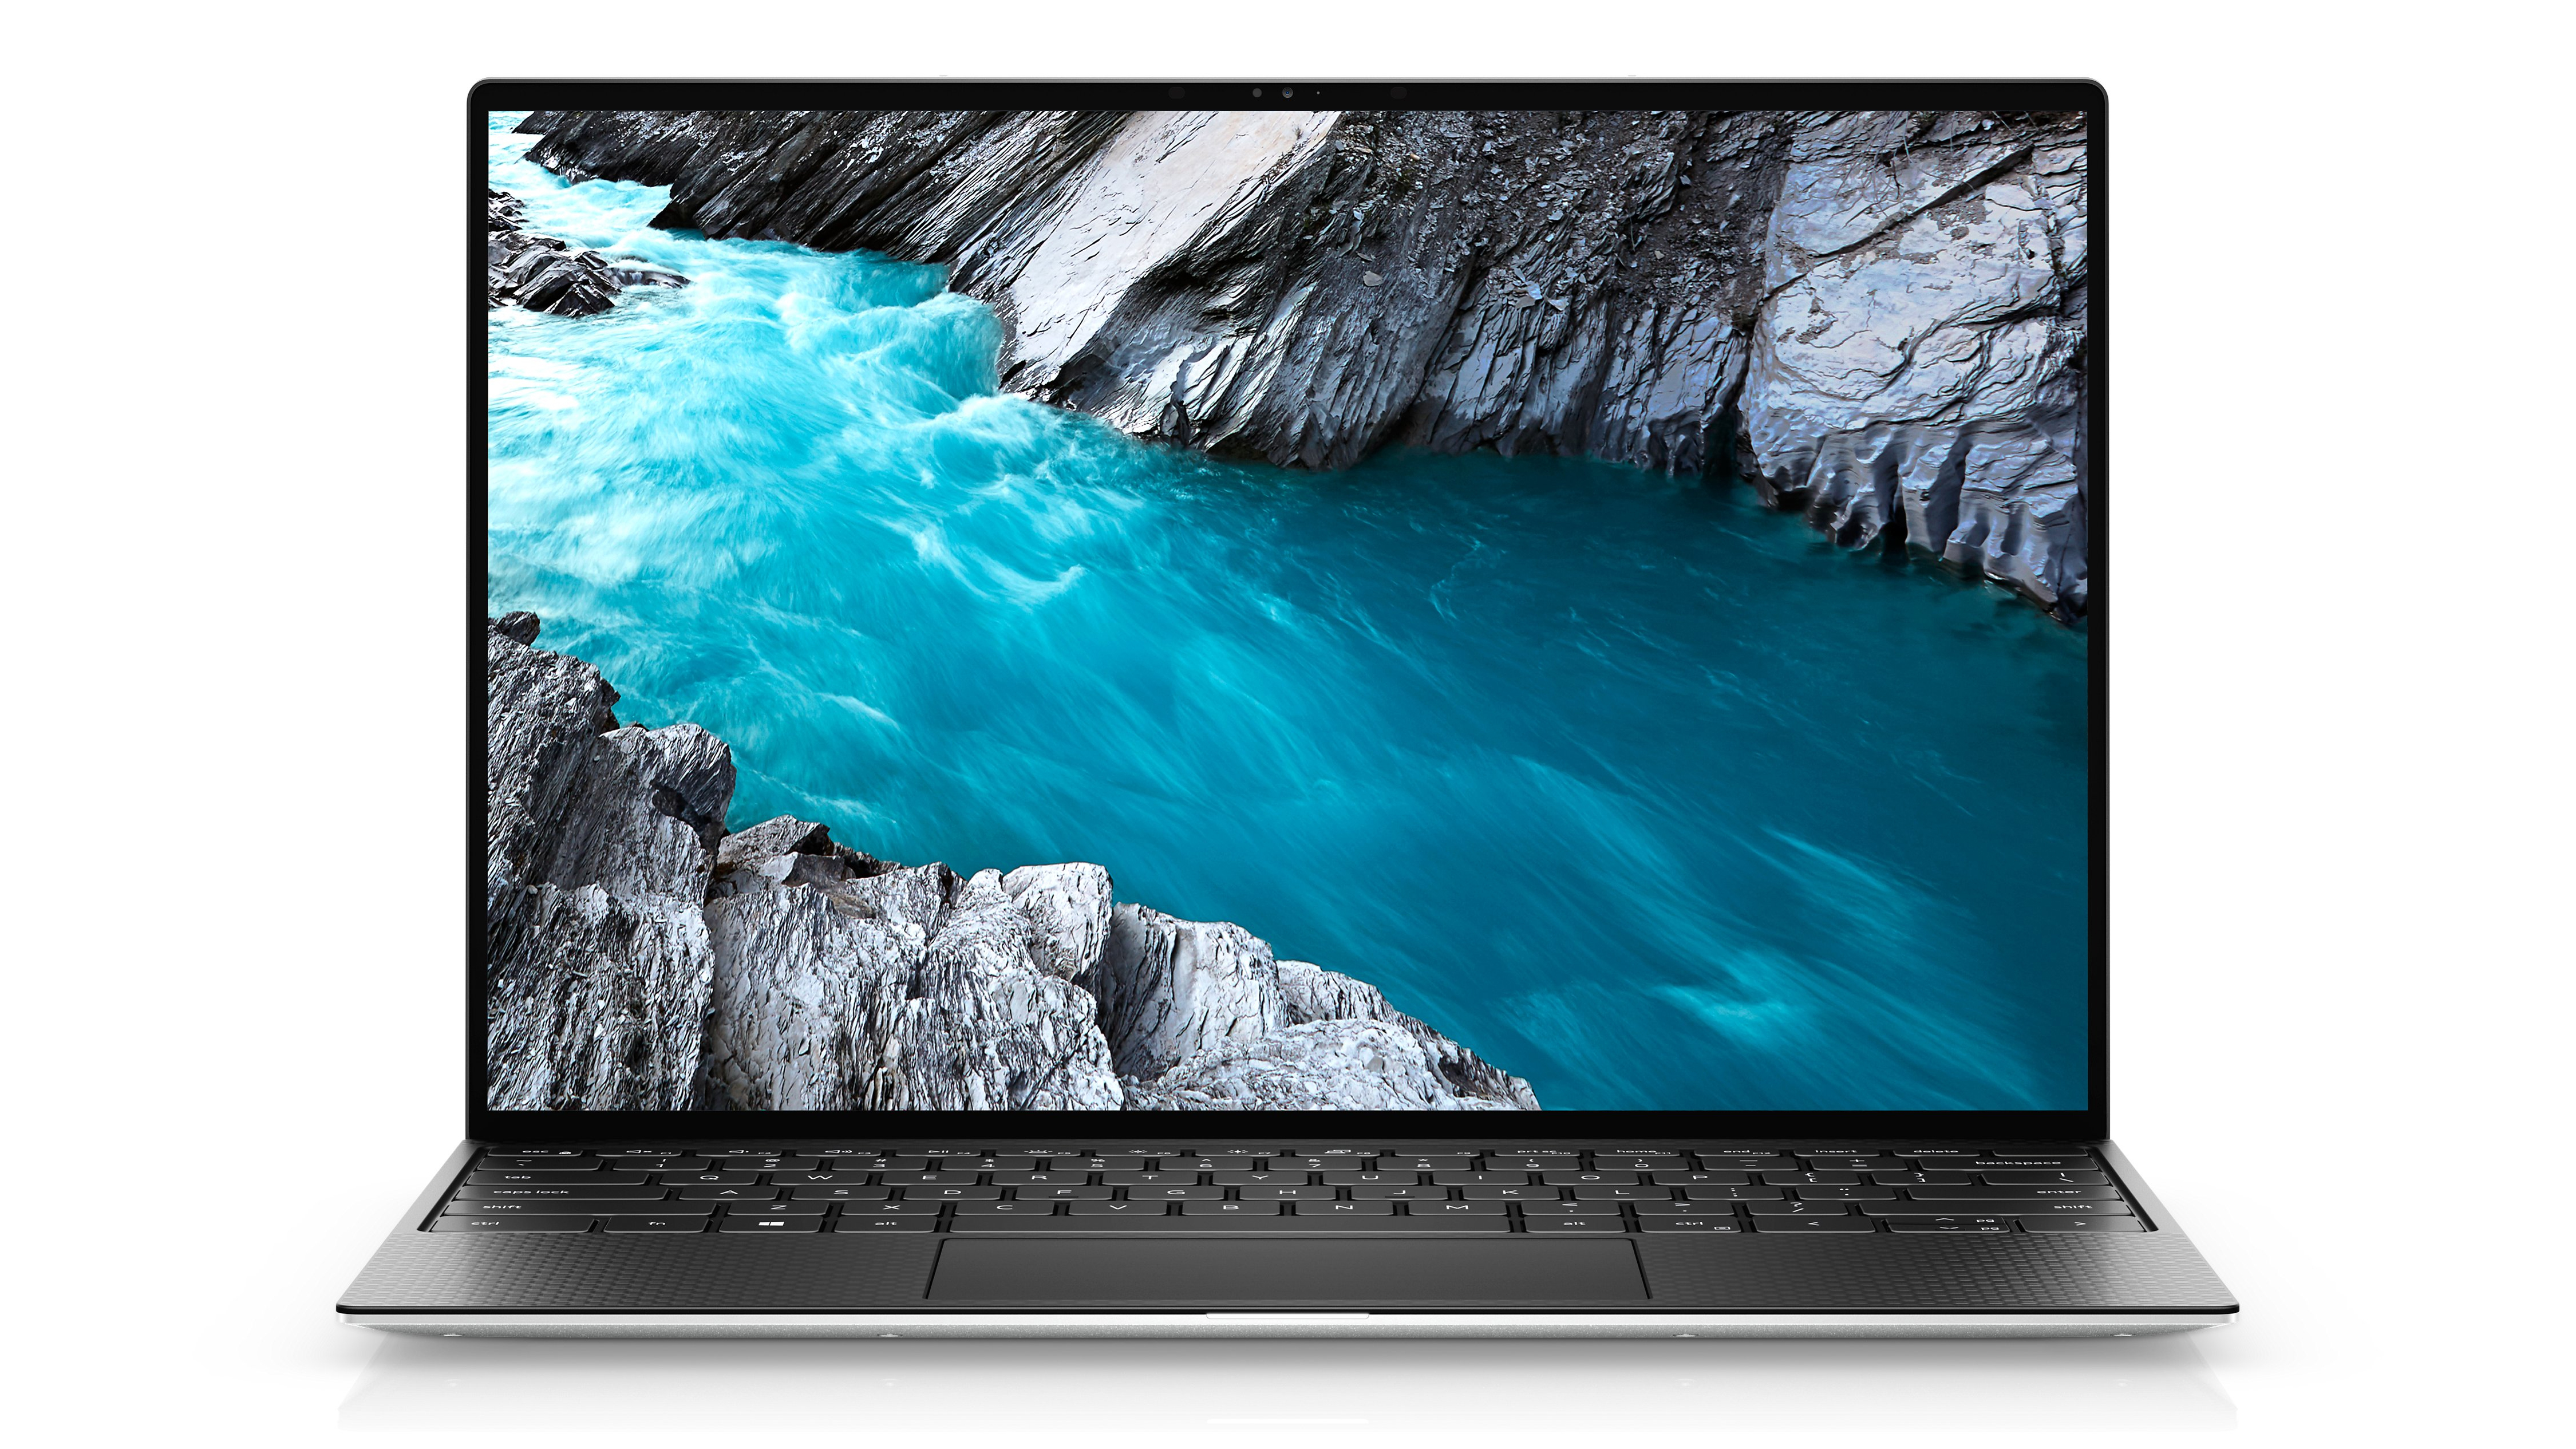 Image of the Dell XPS 13 (Late 2020) laptop in black